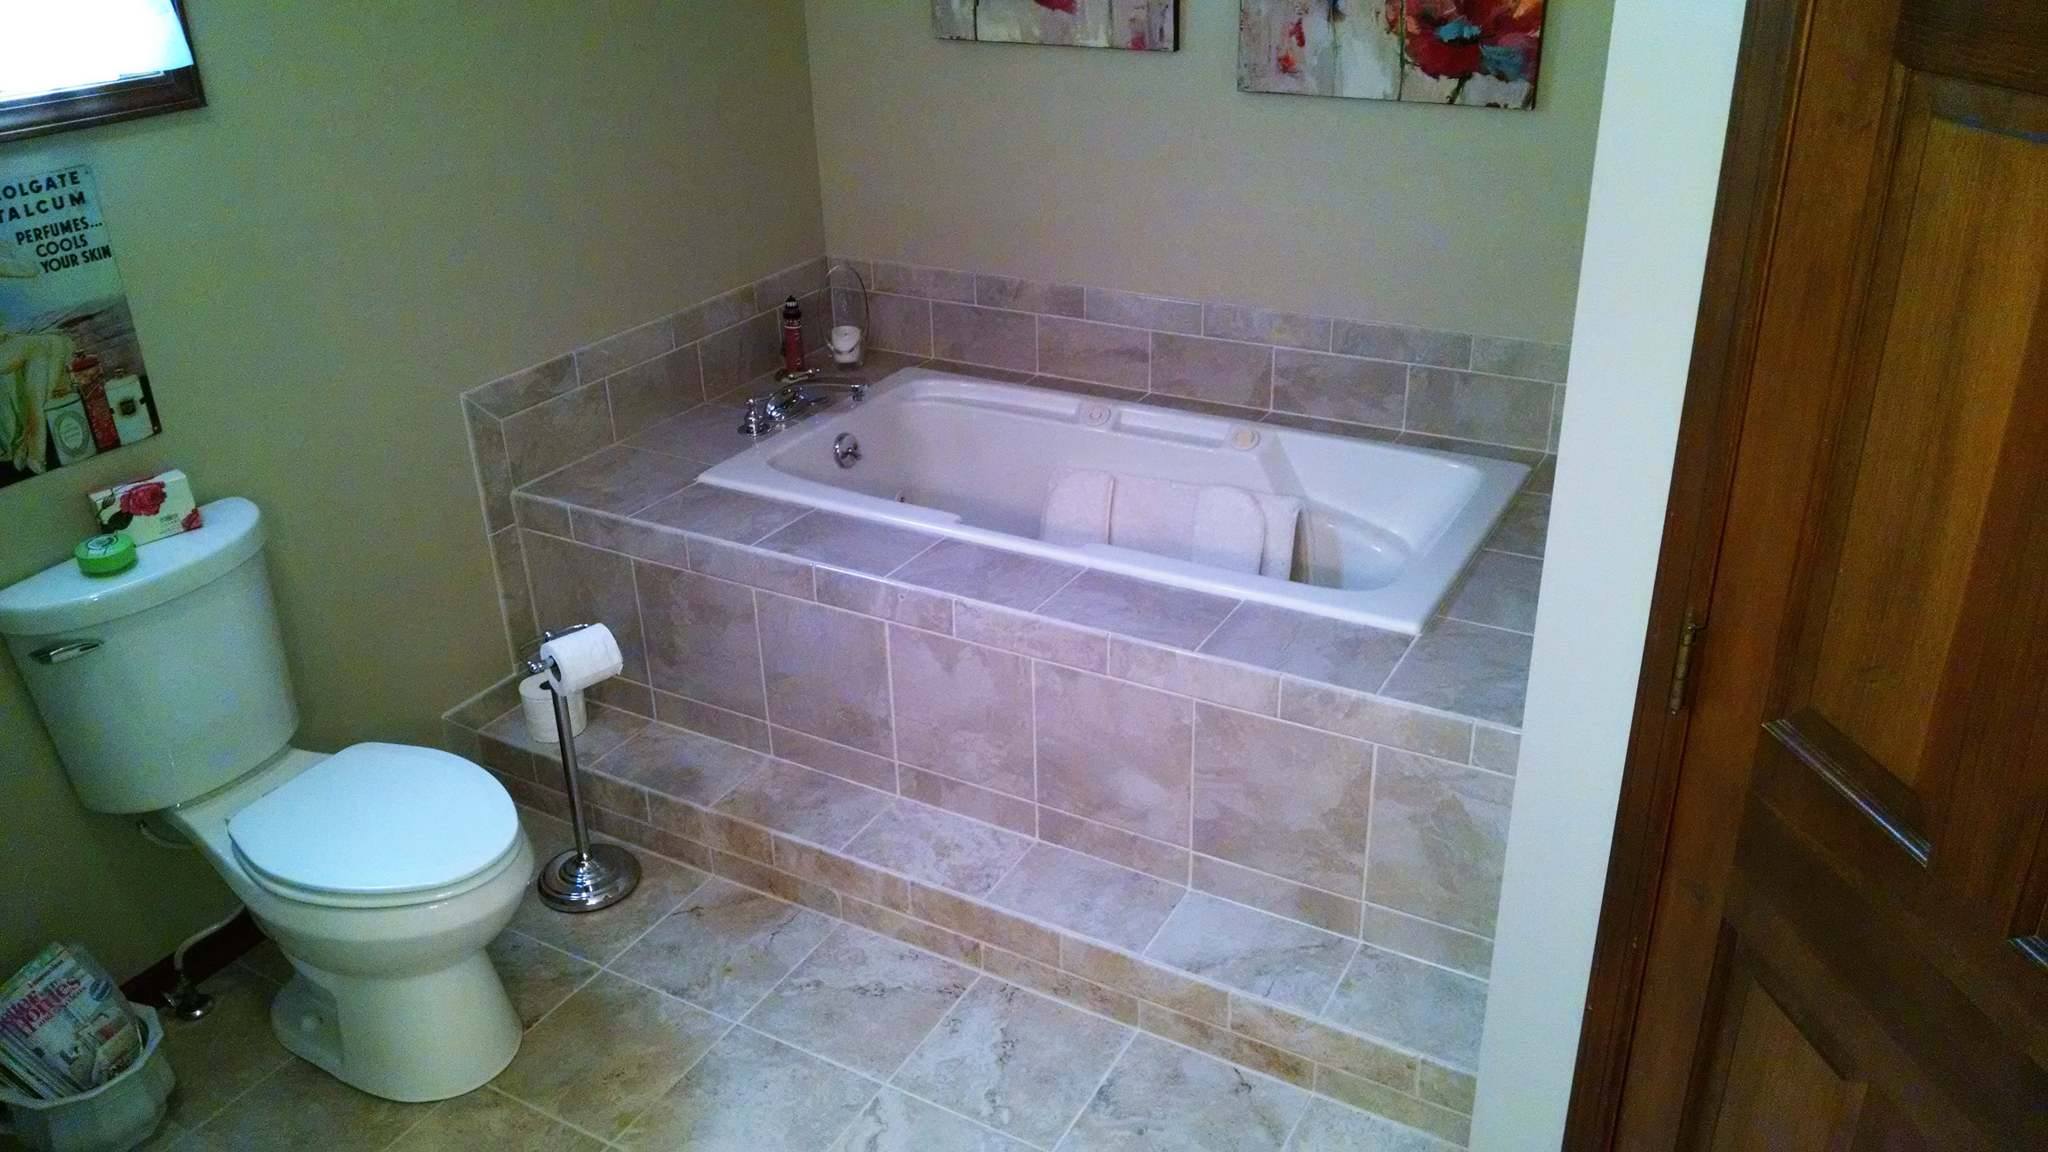 Skelley Construction Inc. - remodeled bathroom, built in jacuzzi tub - Decatur, IL